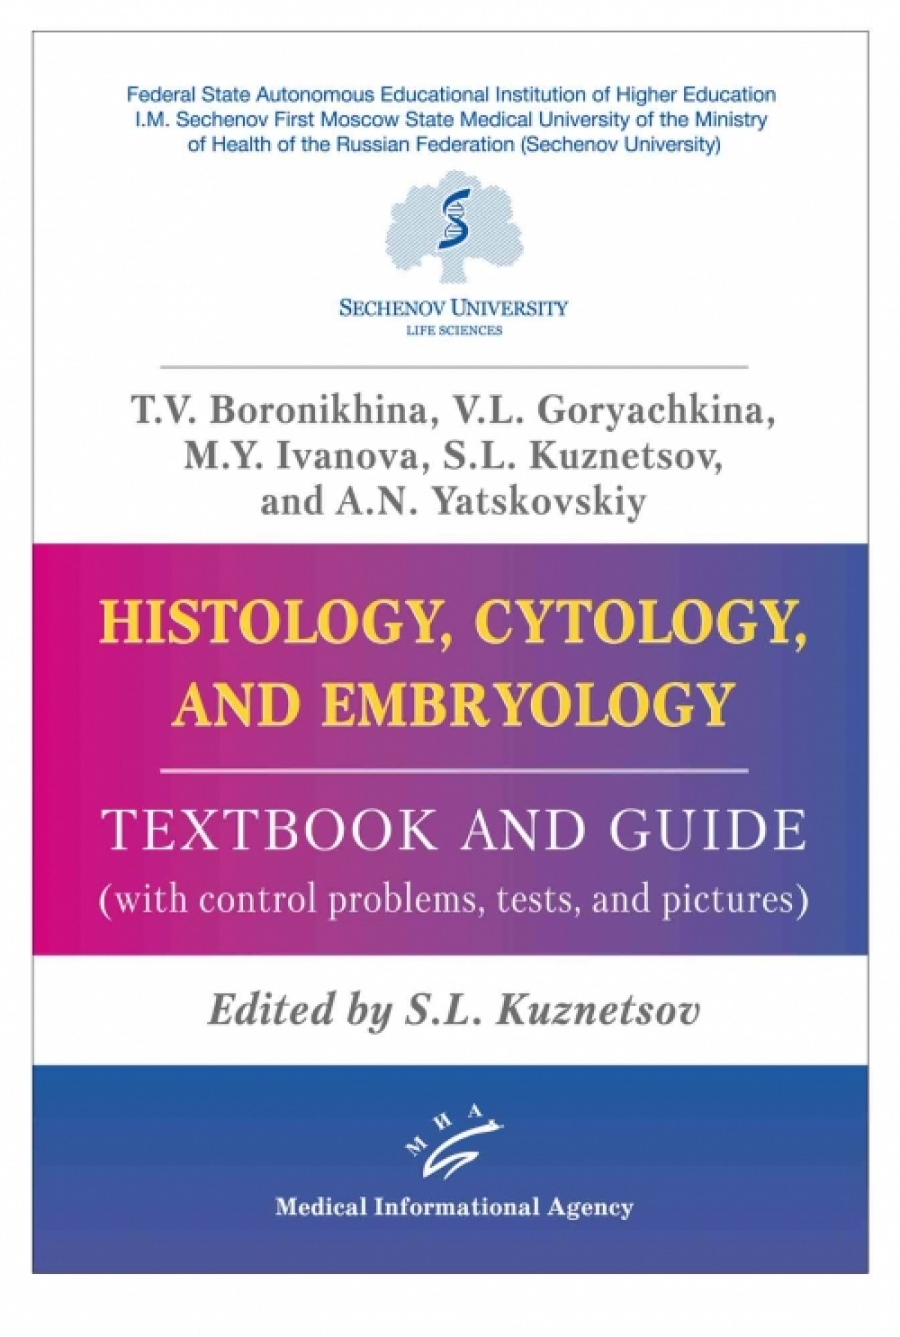  .. Histology, cytology and embryology 